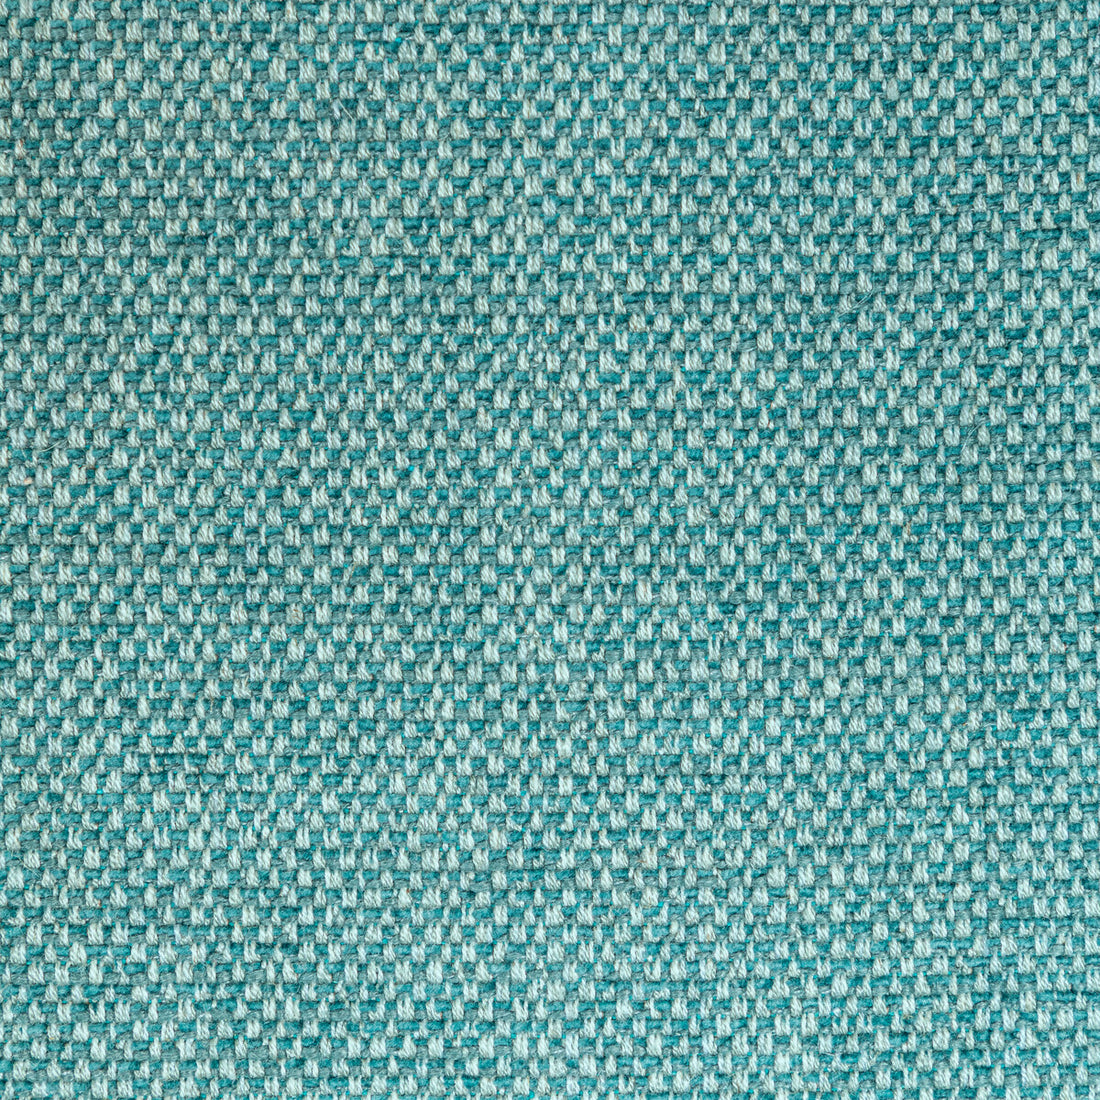 Edern Plain fabric in aqua color - pattern 8022109.13.0 - by Brunschwig &amp; Fils in the Lorient Weaves collection